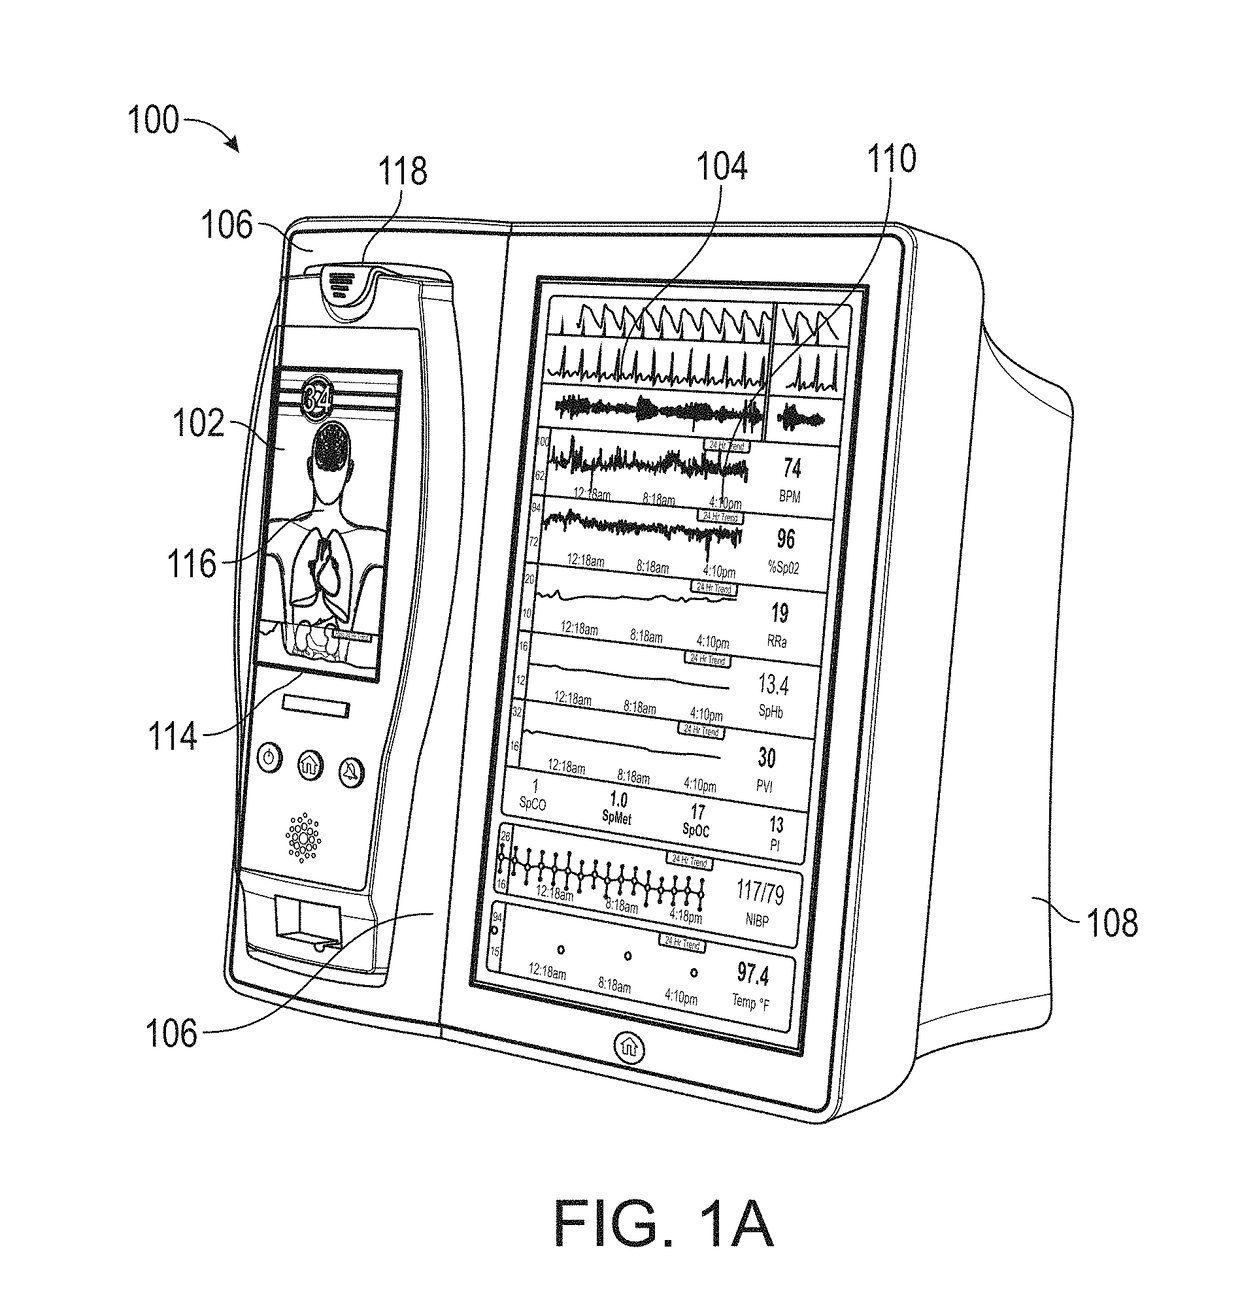 Augmented reality system for displaying patient data